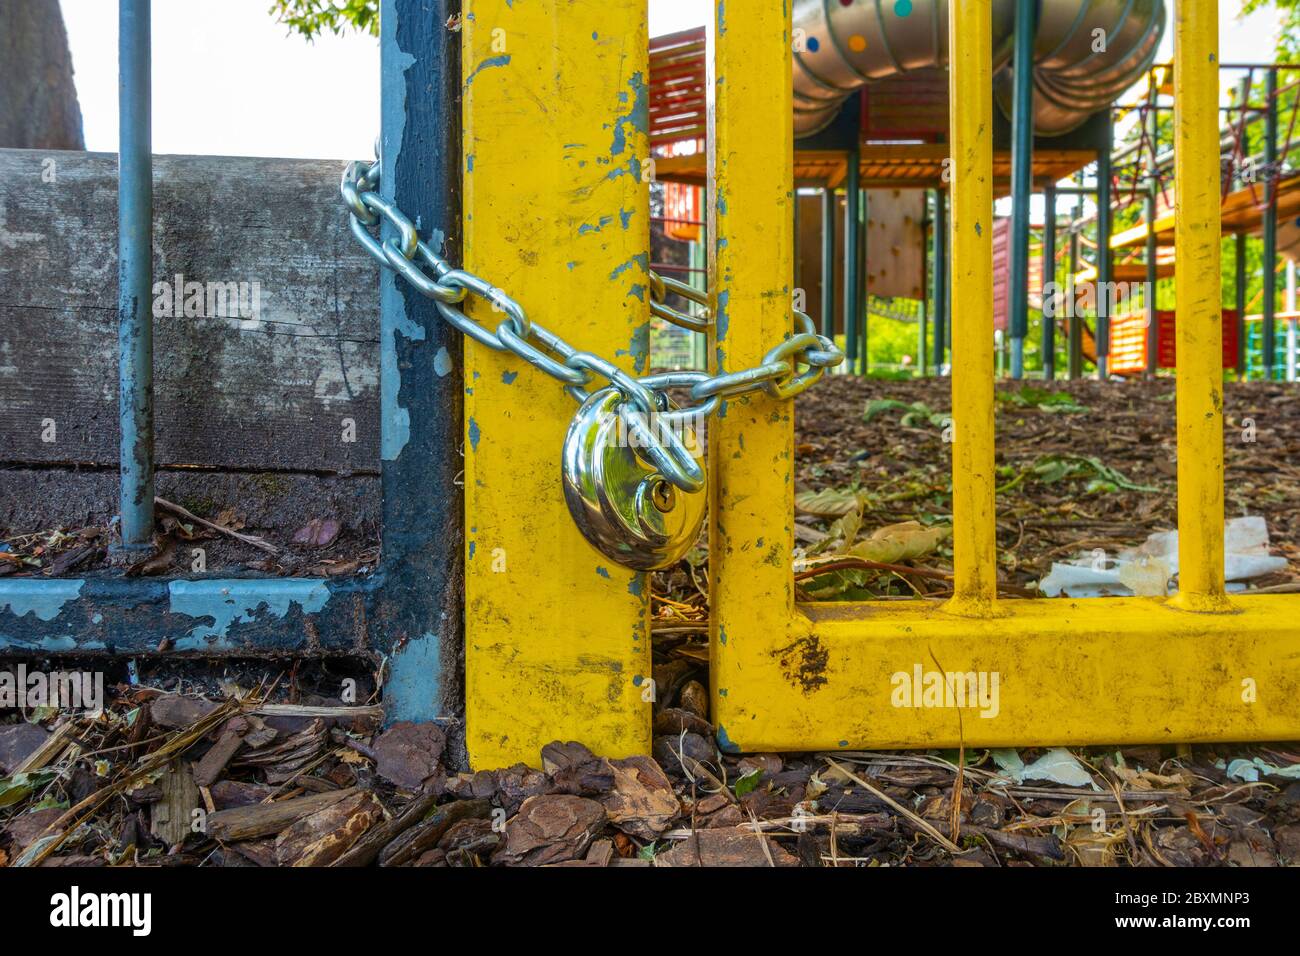 The gate at the entrance to a children's playground is shut with a chain and padlock die to coronavirus pandemic social distancing rules. Stock Photo